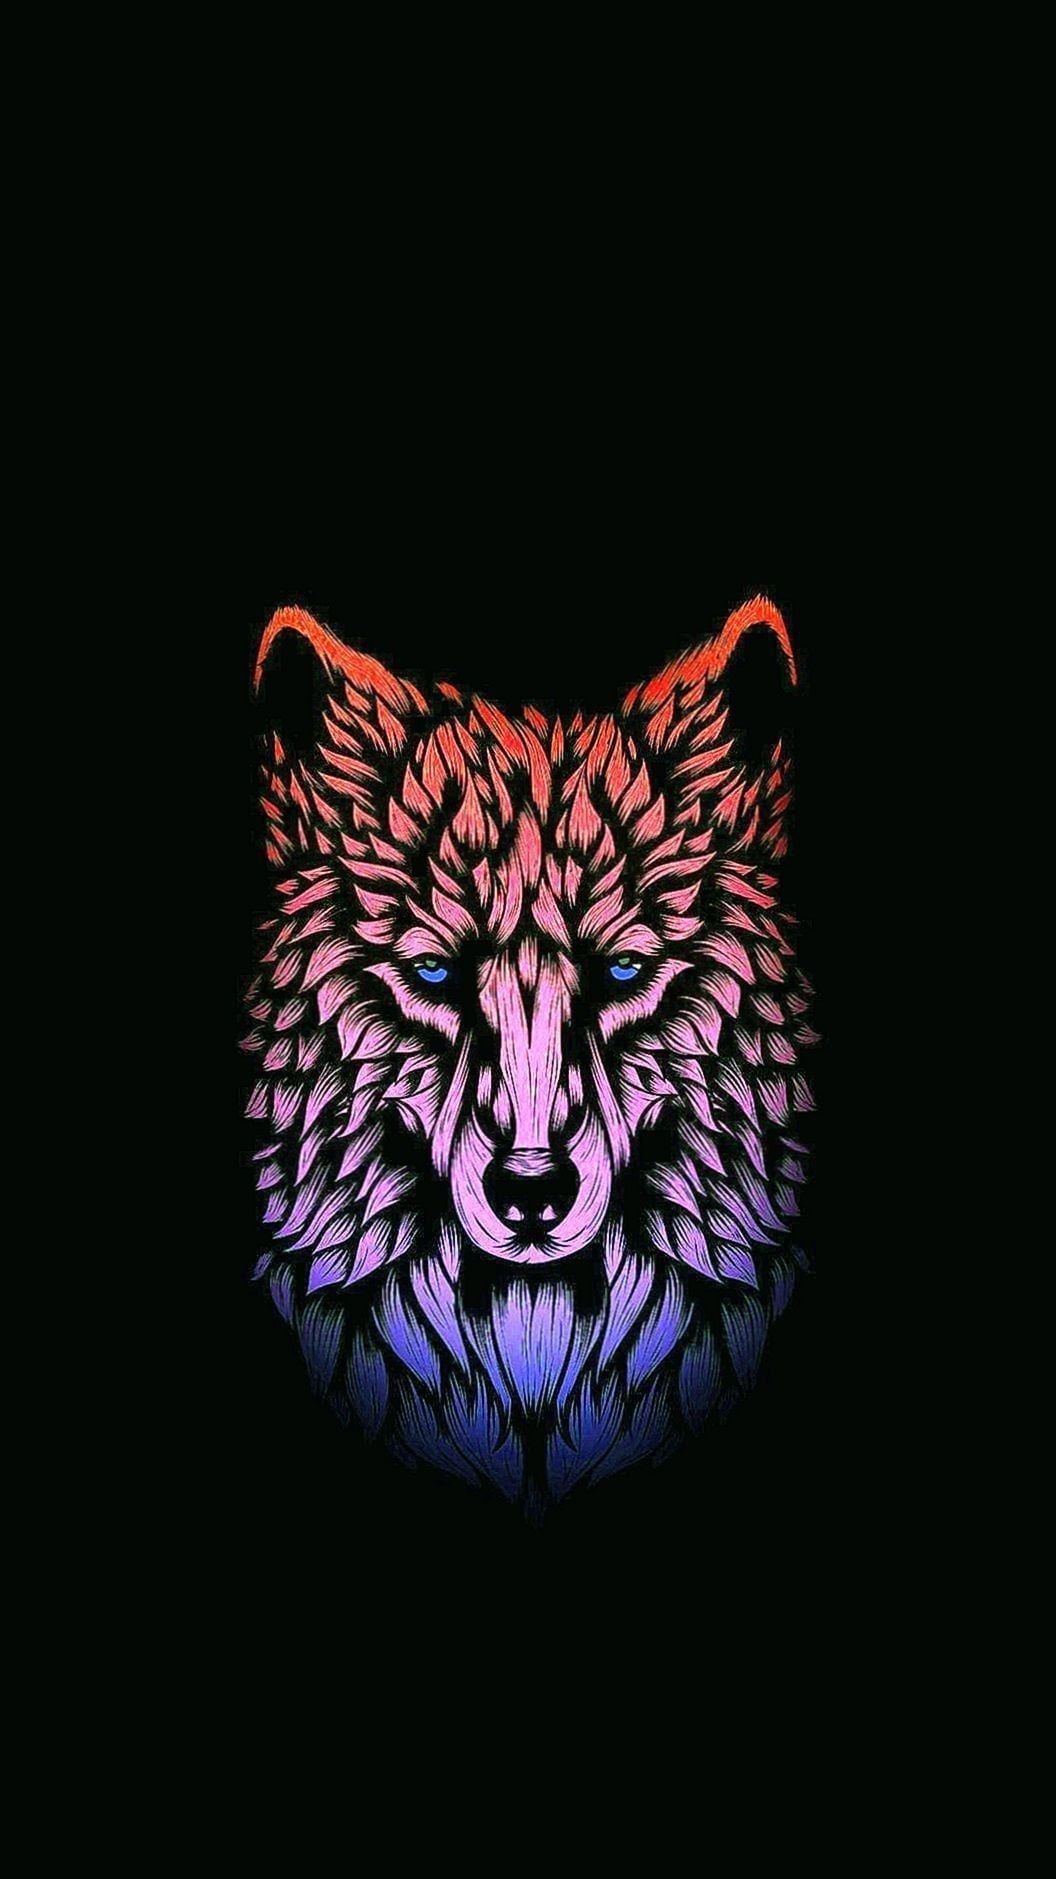 Amoled wolf wallpapers